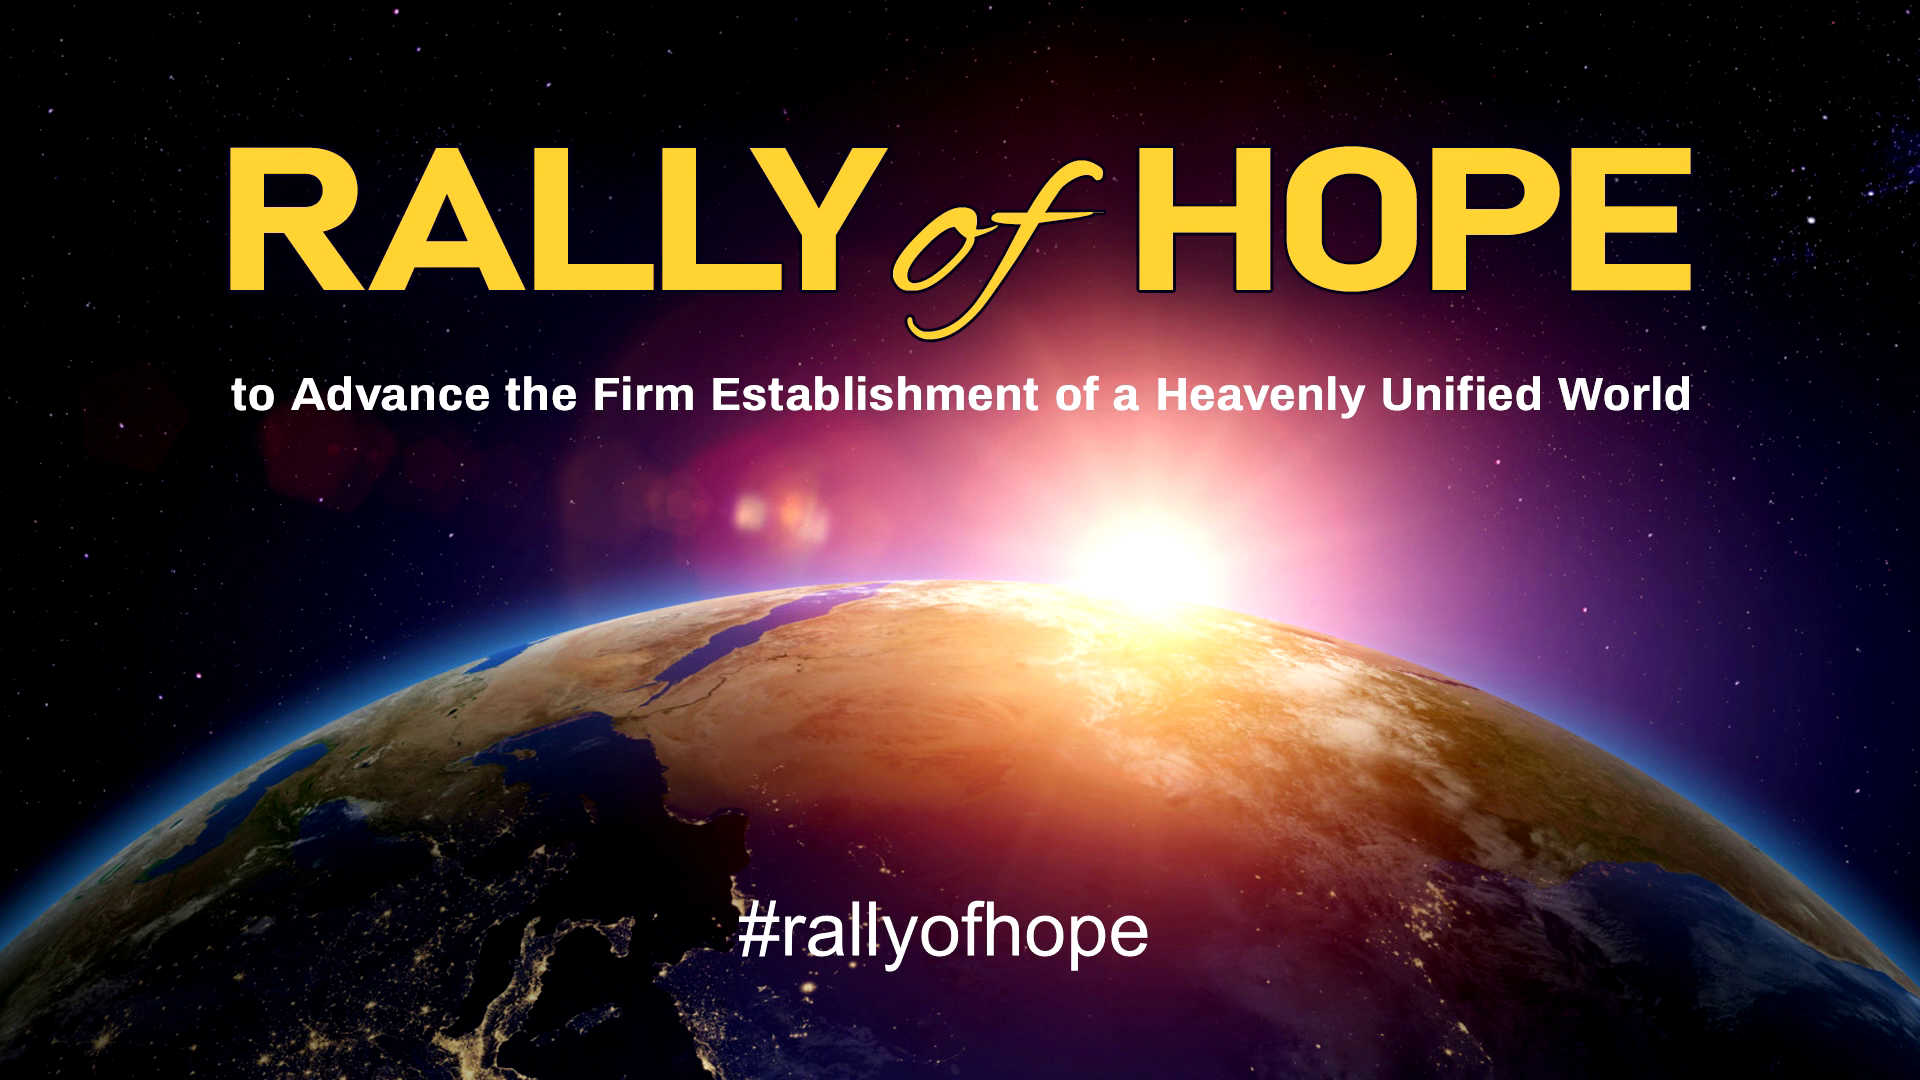 Rally of Hope for the Realization of a Heavenly Unified World